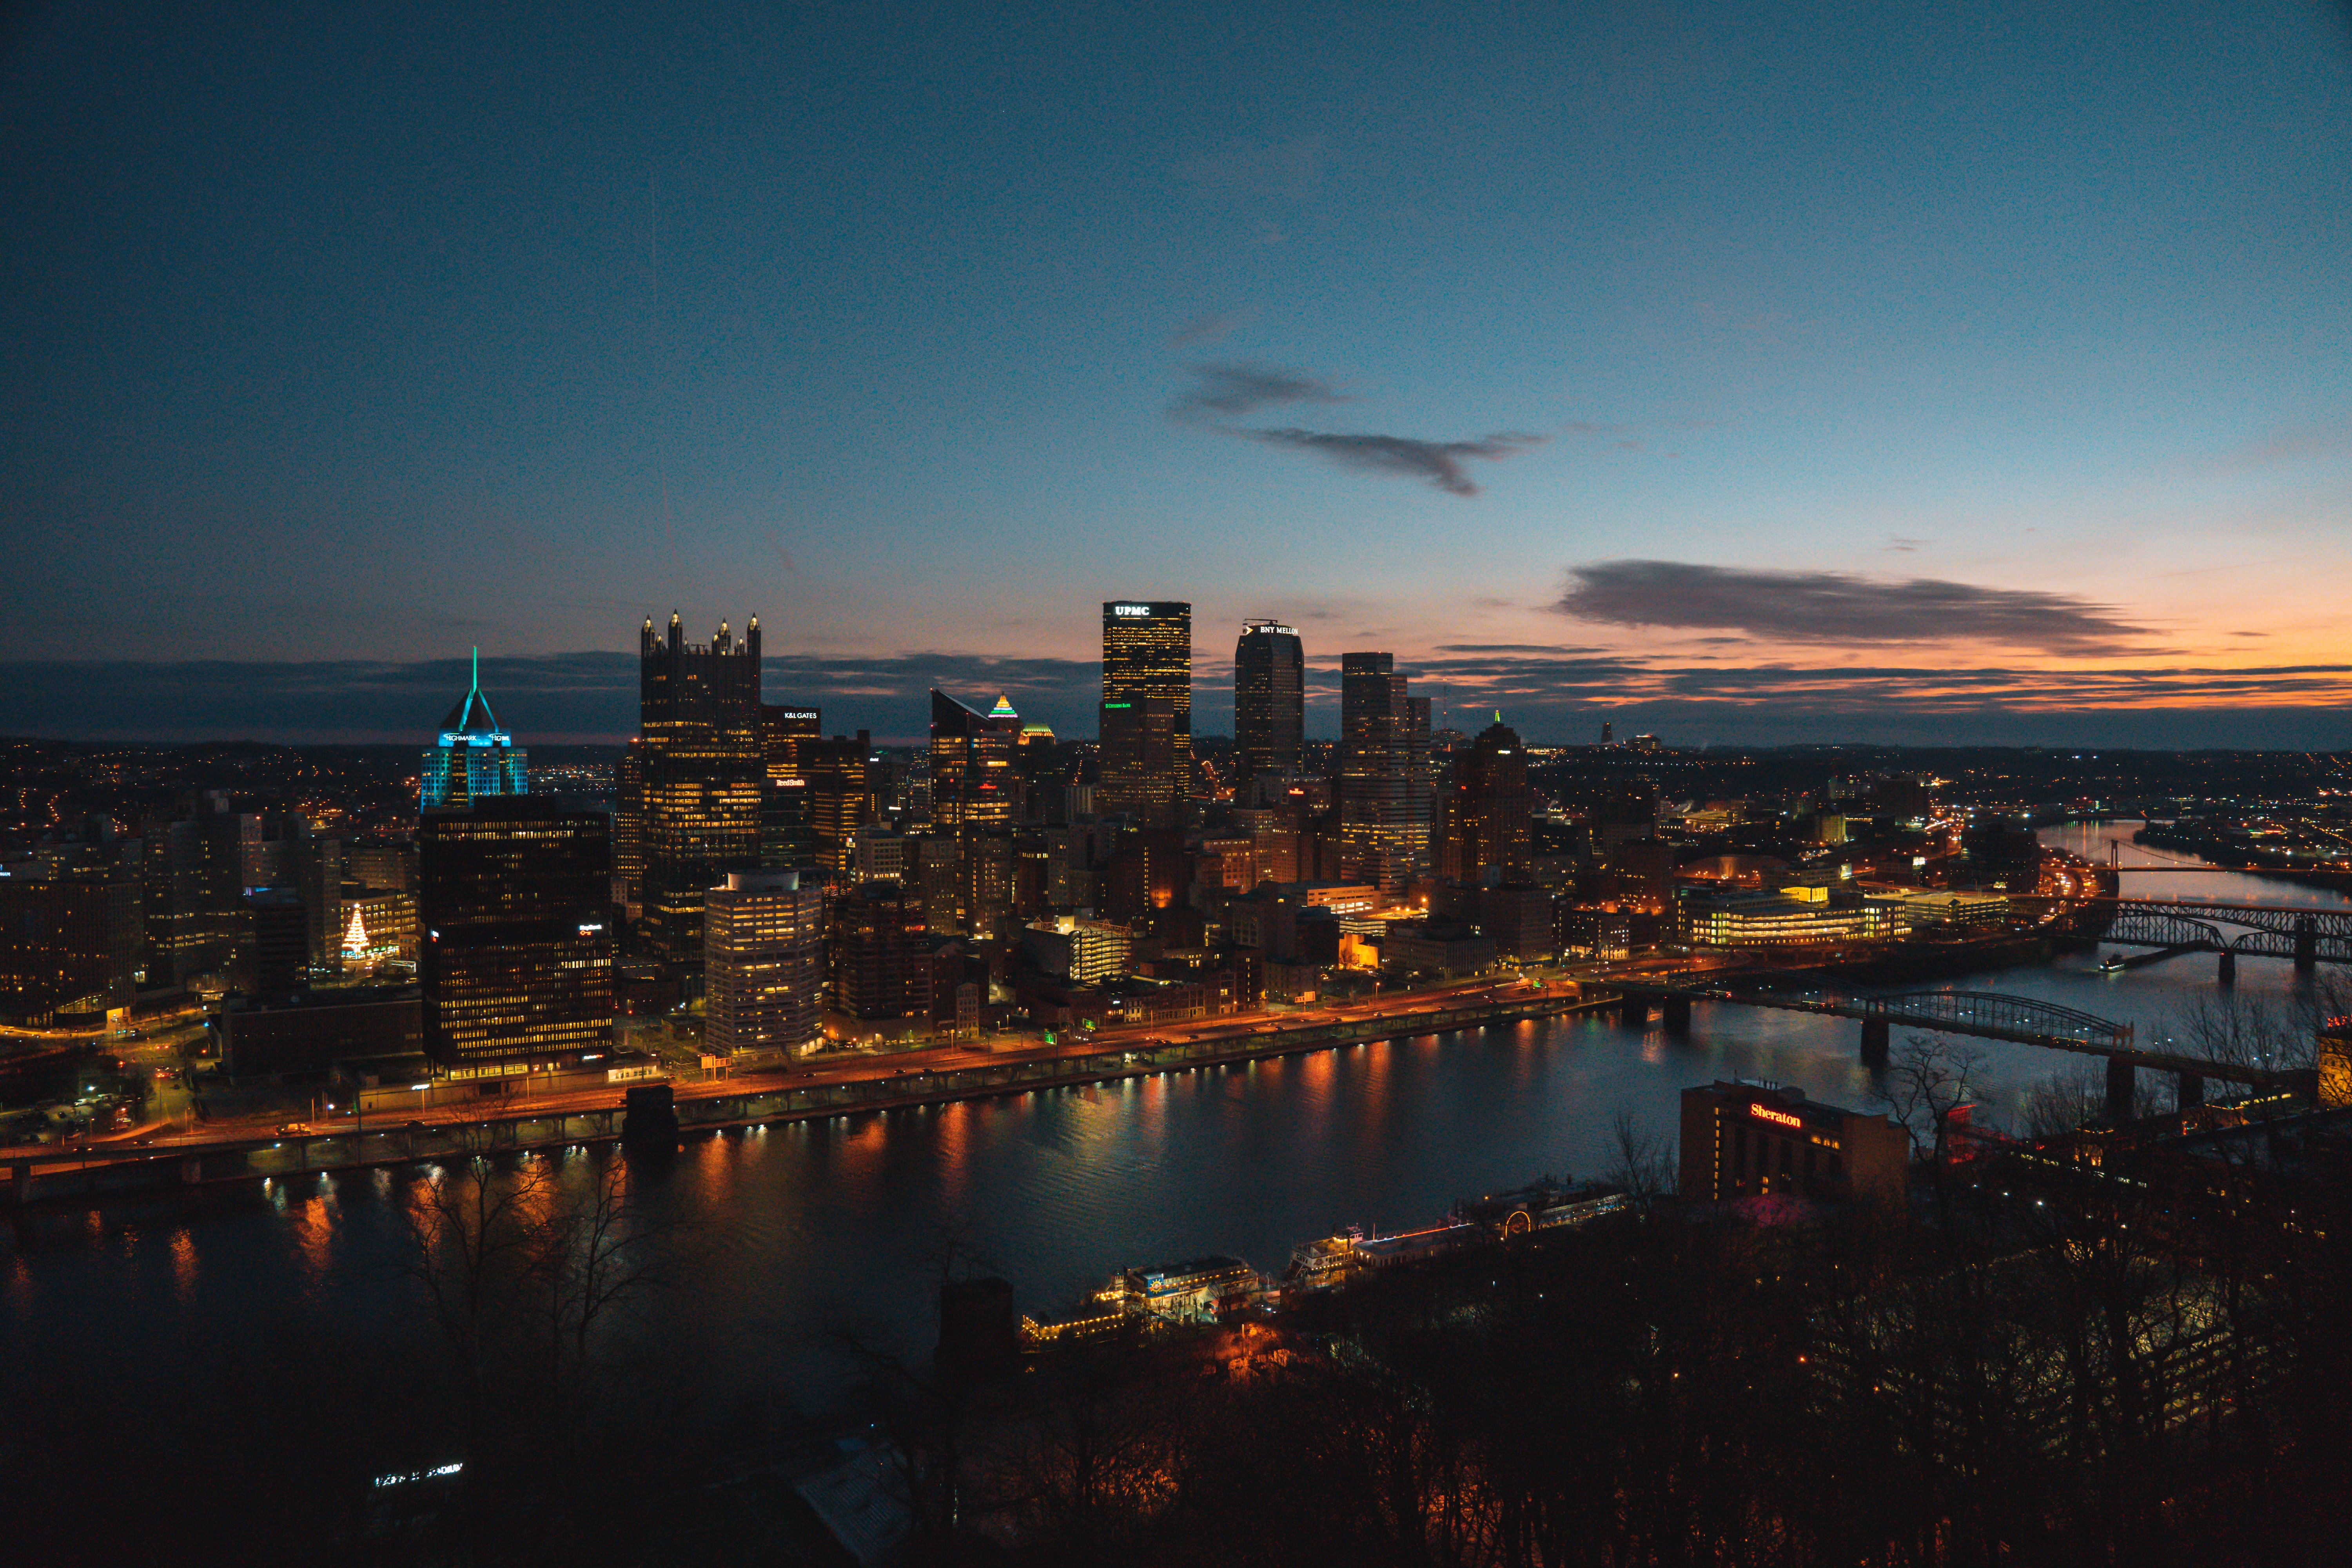 pittsburgh, cities, rivers, architecture, usa, building, view from above, night city, united states